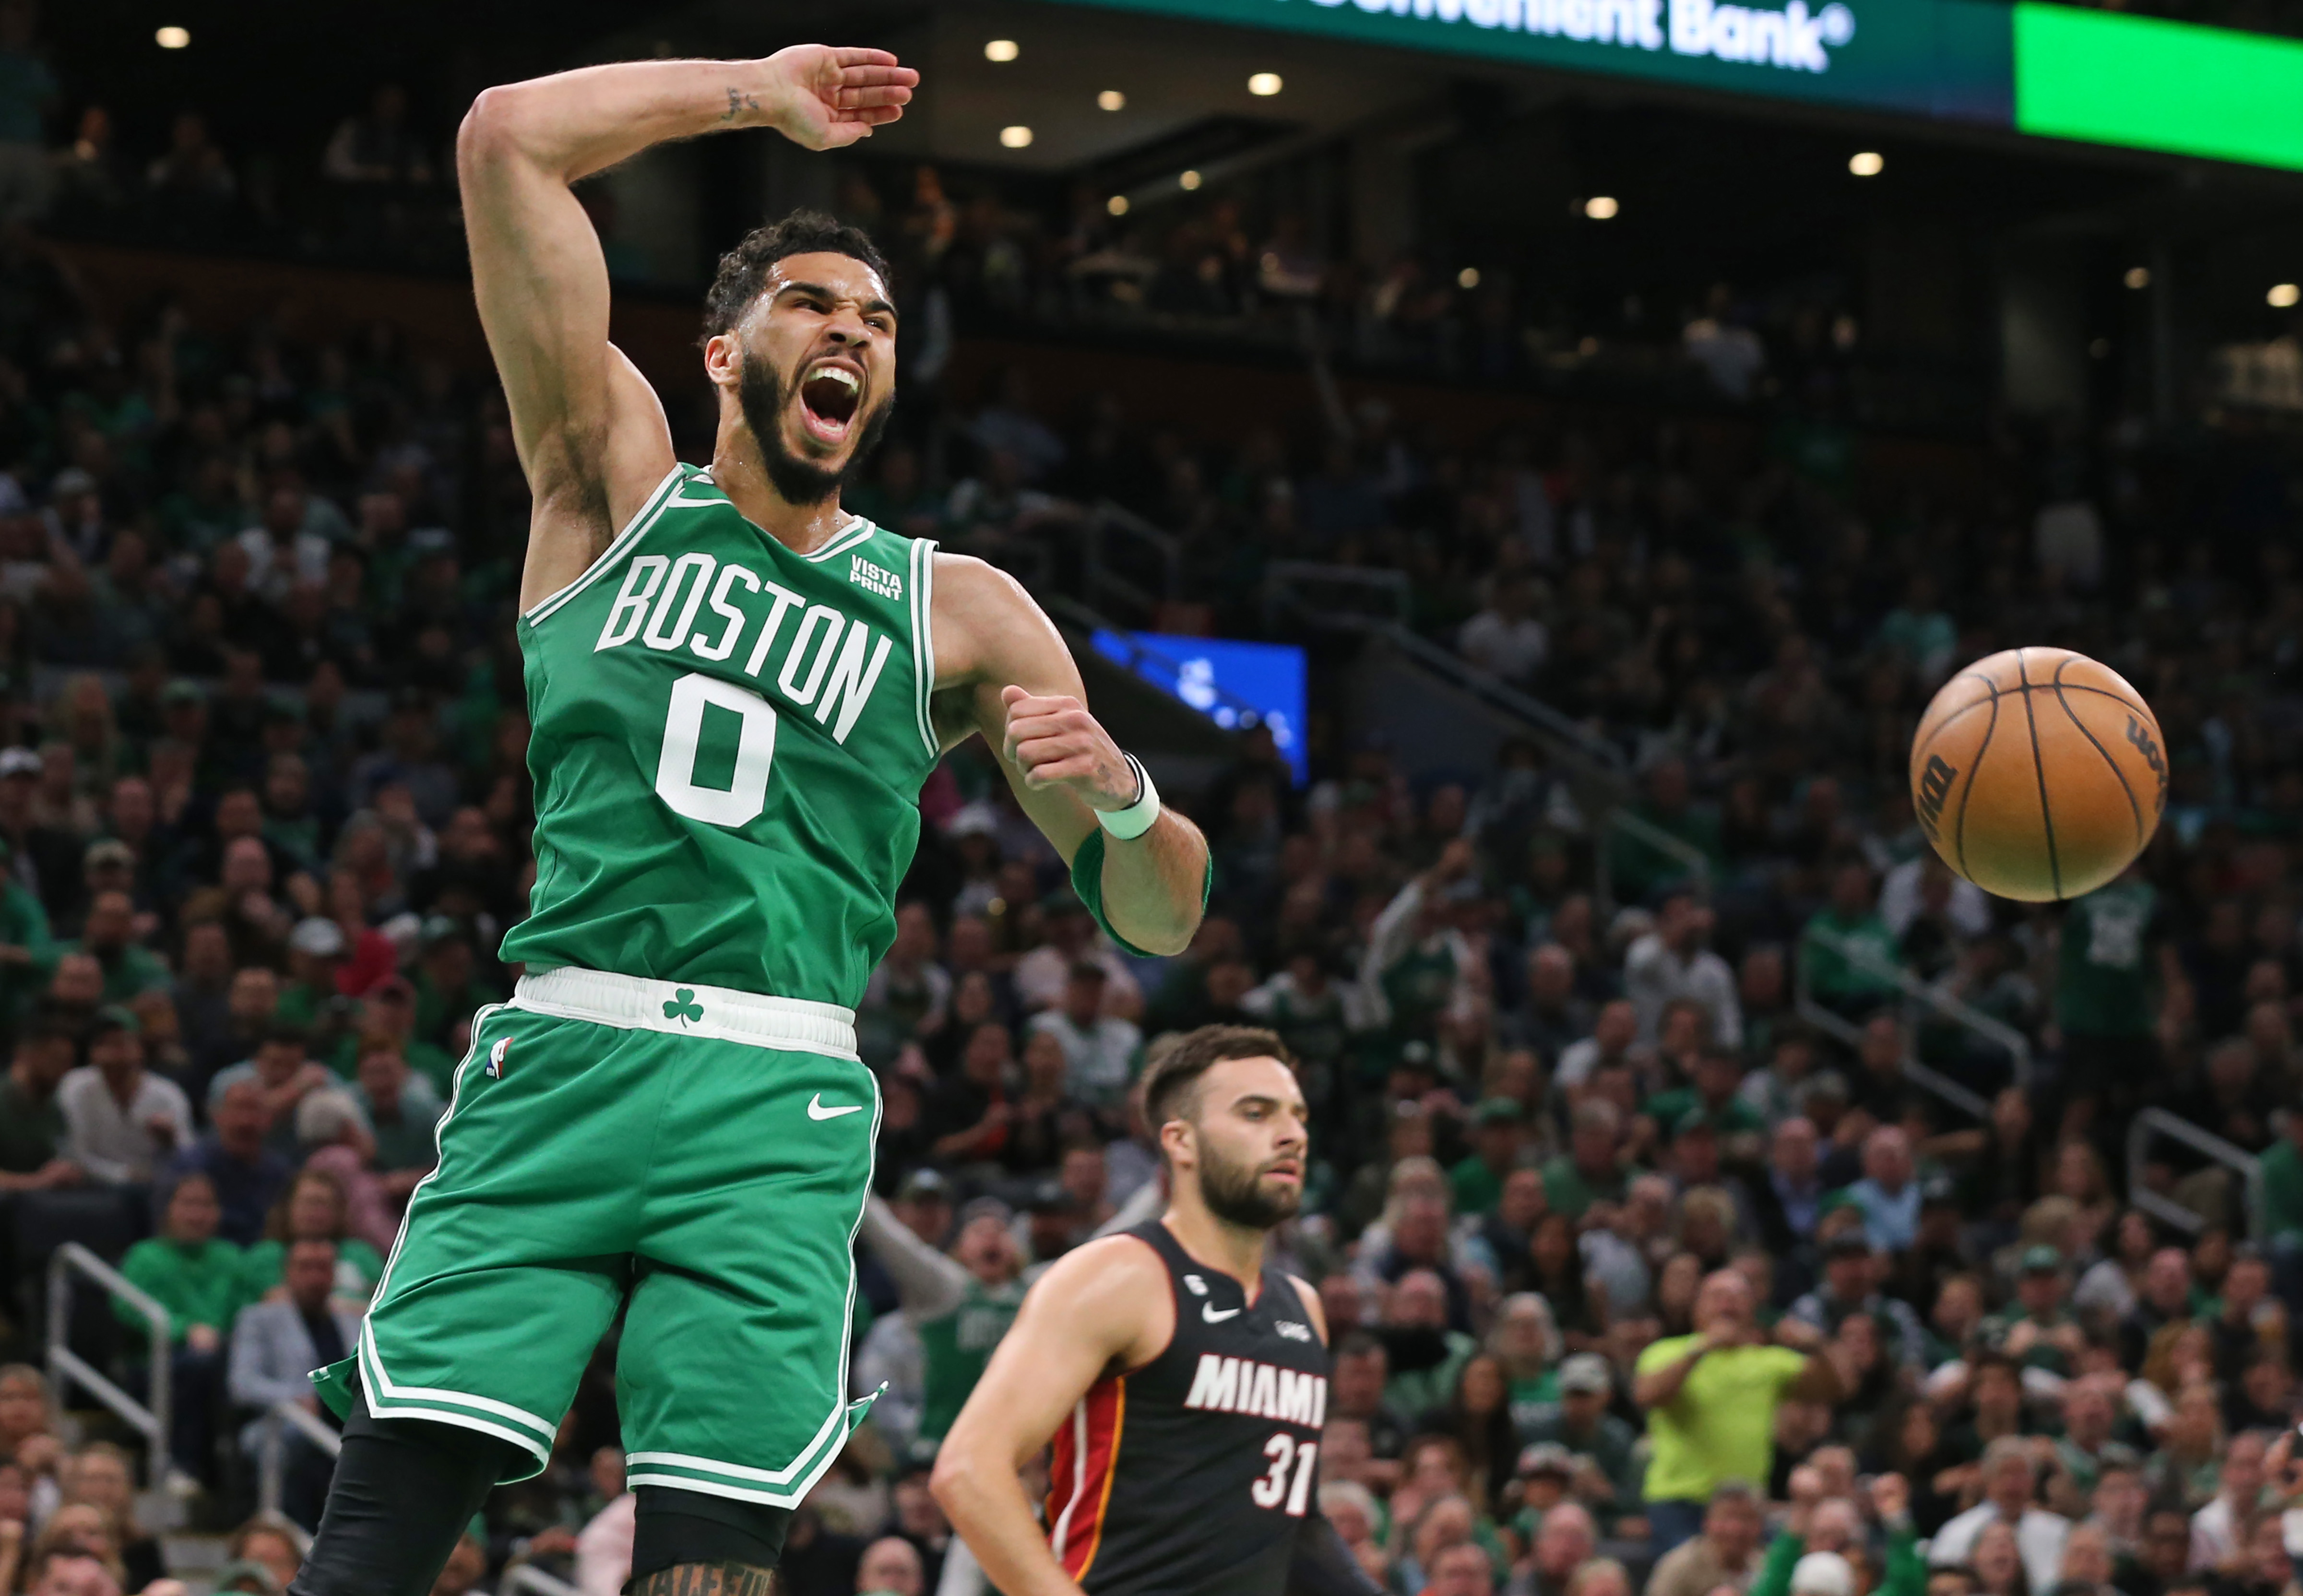 INSIDE THE CELTICS: As advertised, and then some